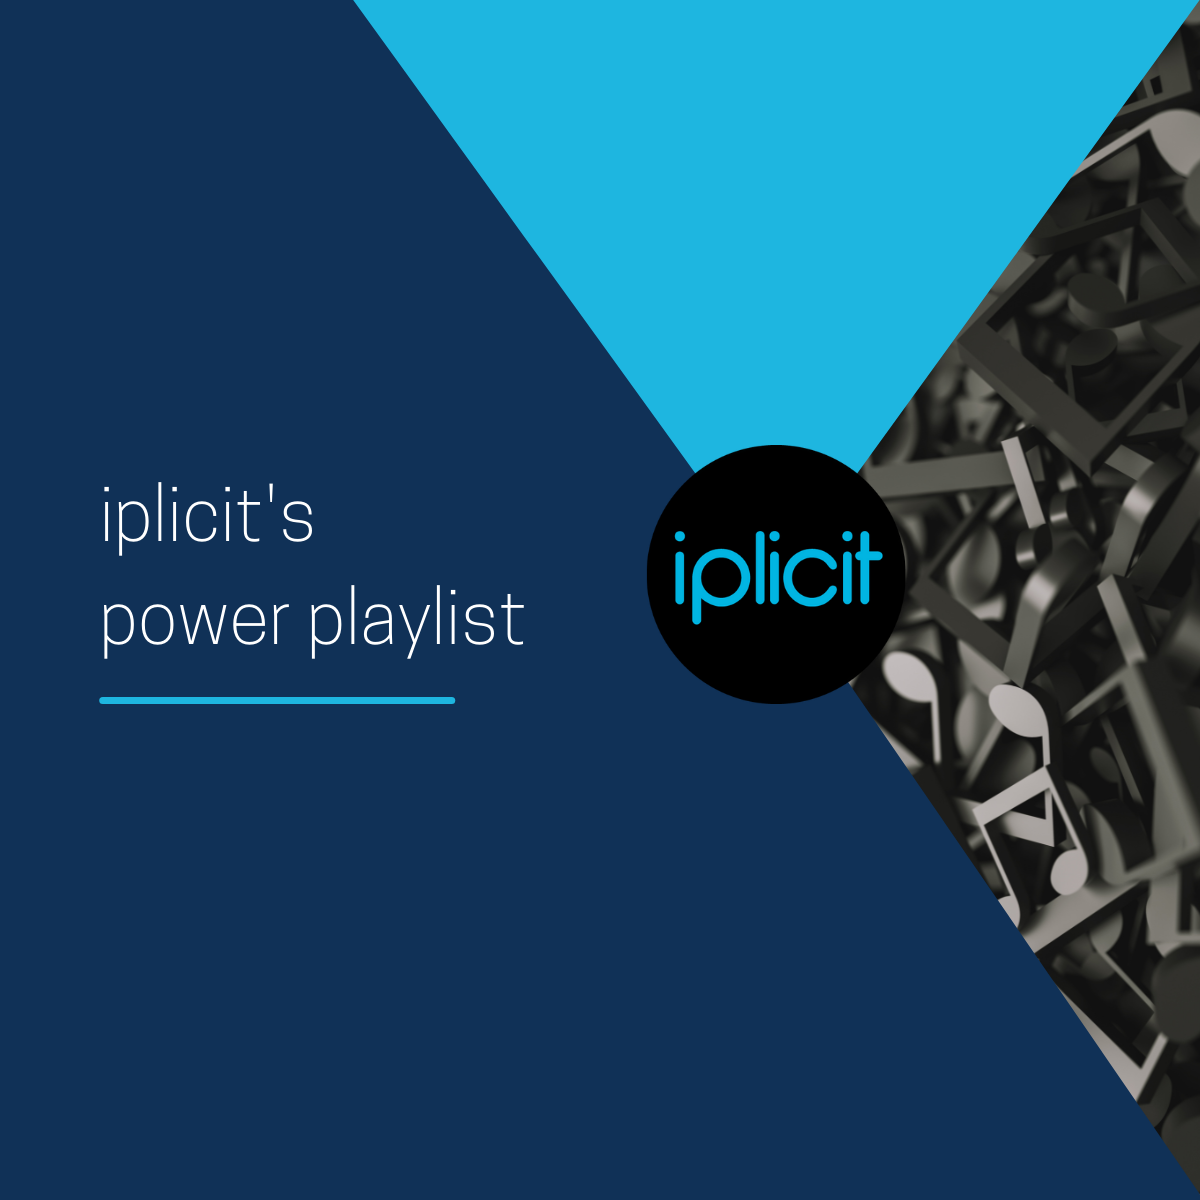 The iplicit team’s power playlist for 2022